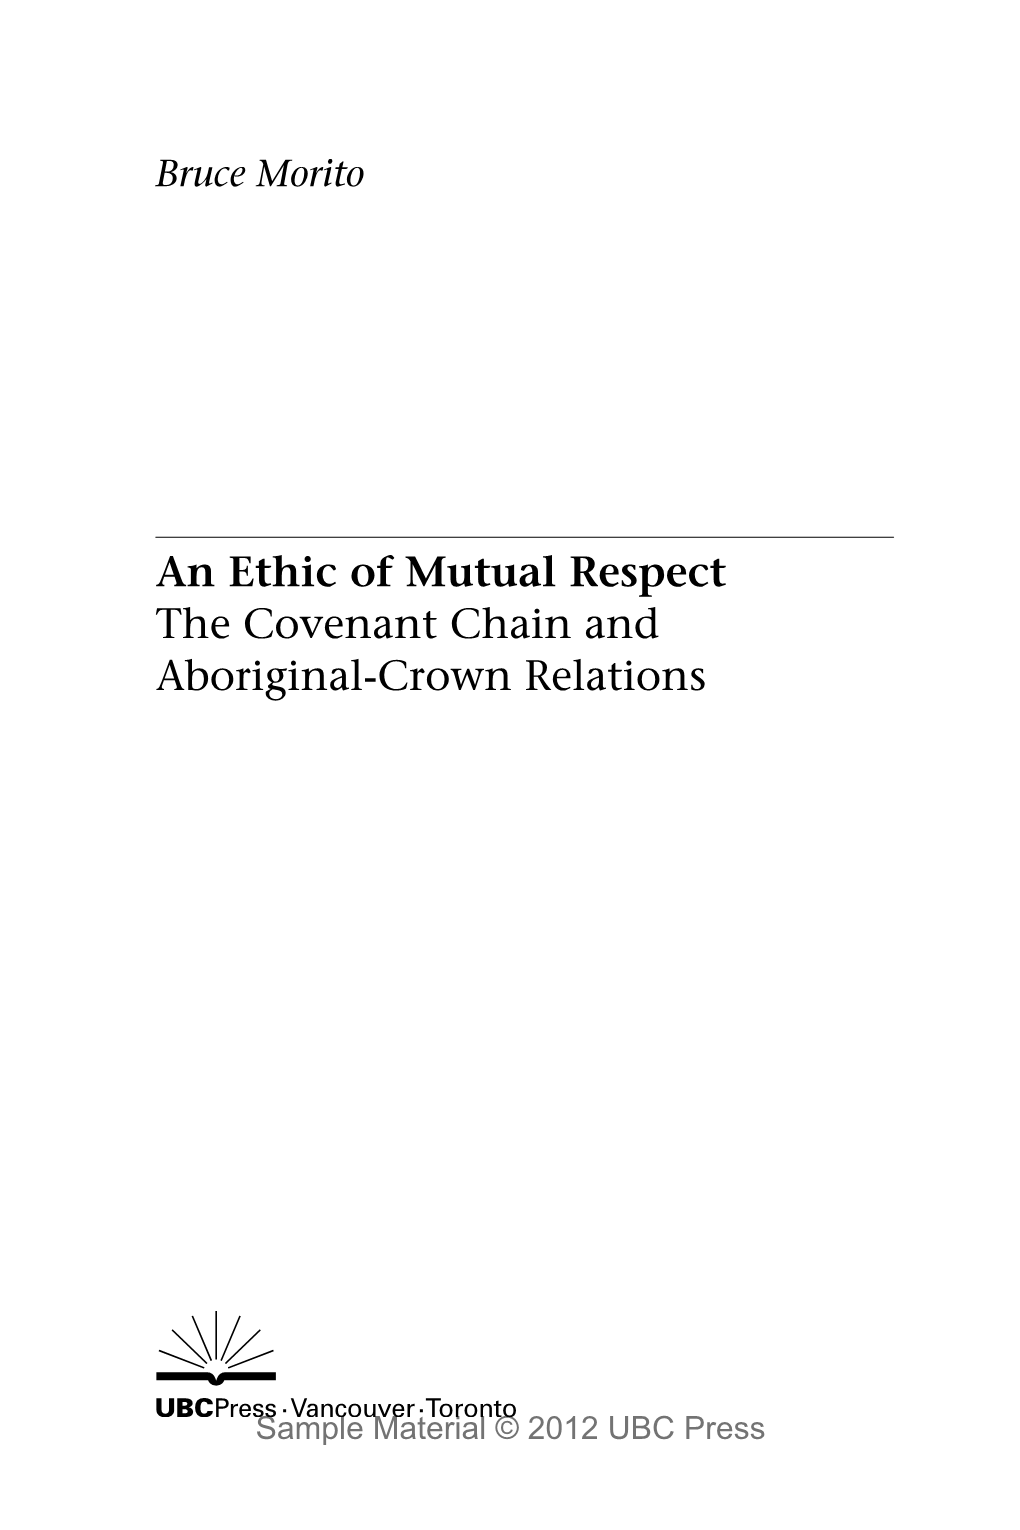 An Ethic of Mutual Respect the Covenant Chain and Aboriginal-Crown Relations